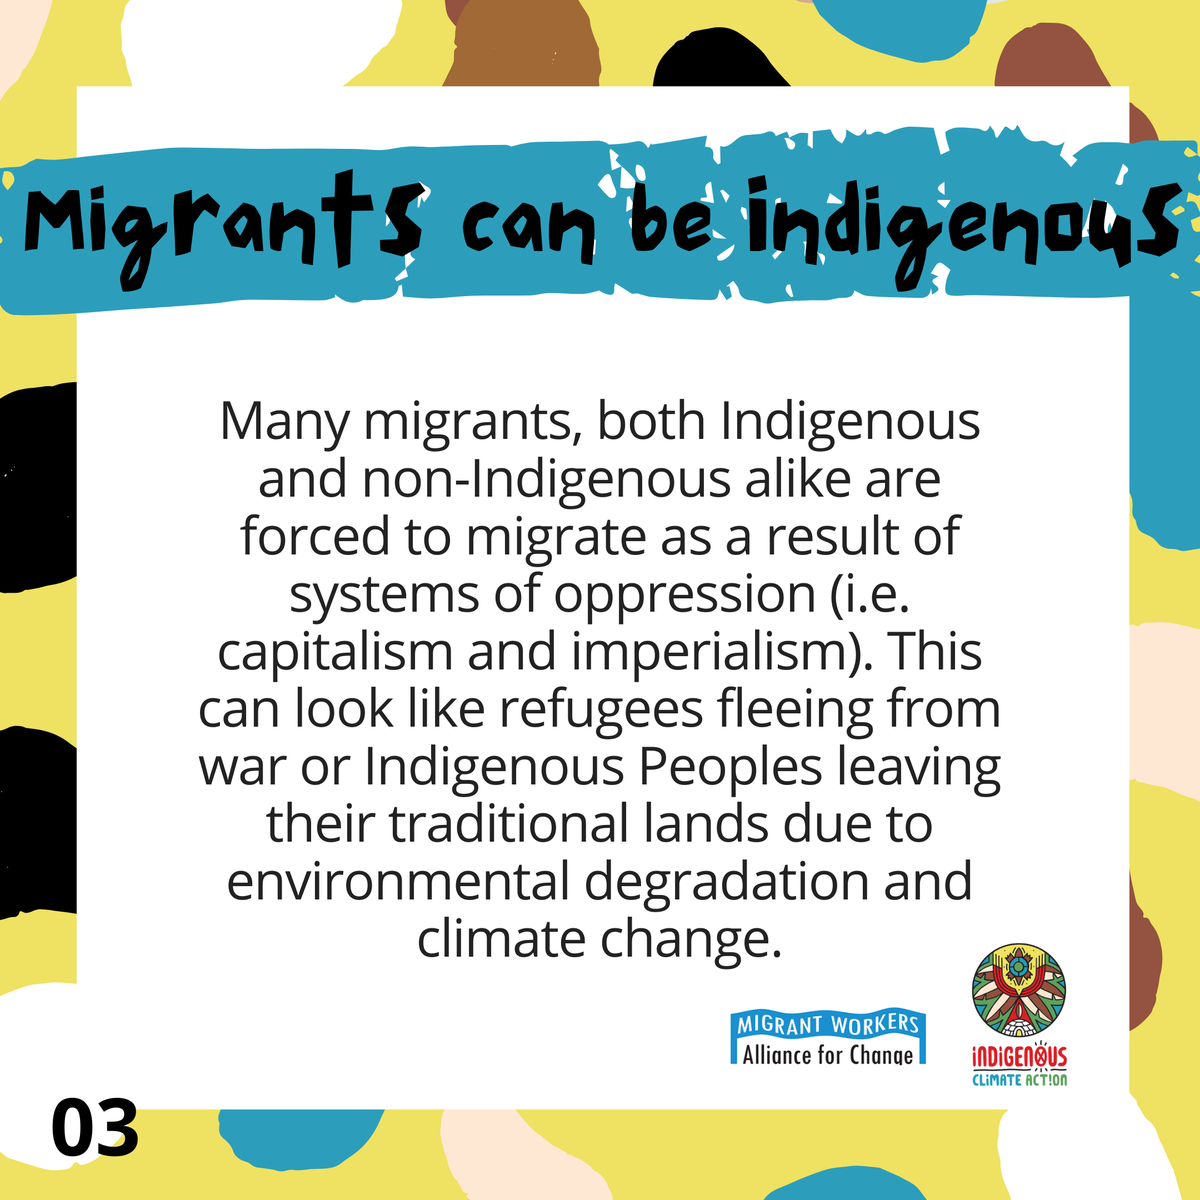 Migrants can be Indigenous, too. Many migrants, both Indigenous and non-Indigenous alike are forced to migrate as a result of systems of oppression (i.e. capitalism and imperialism) (3/9)